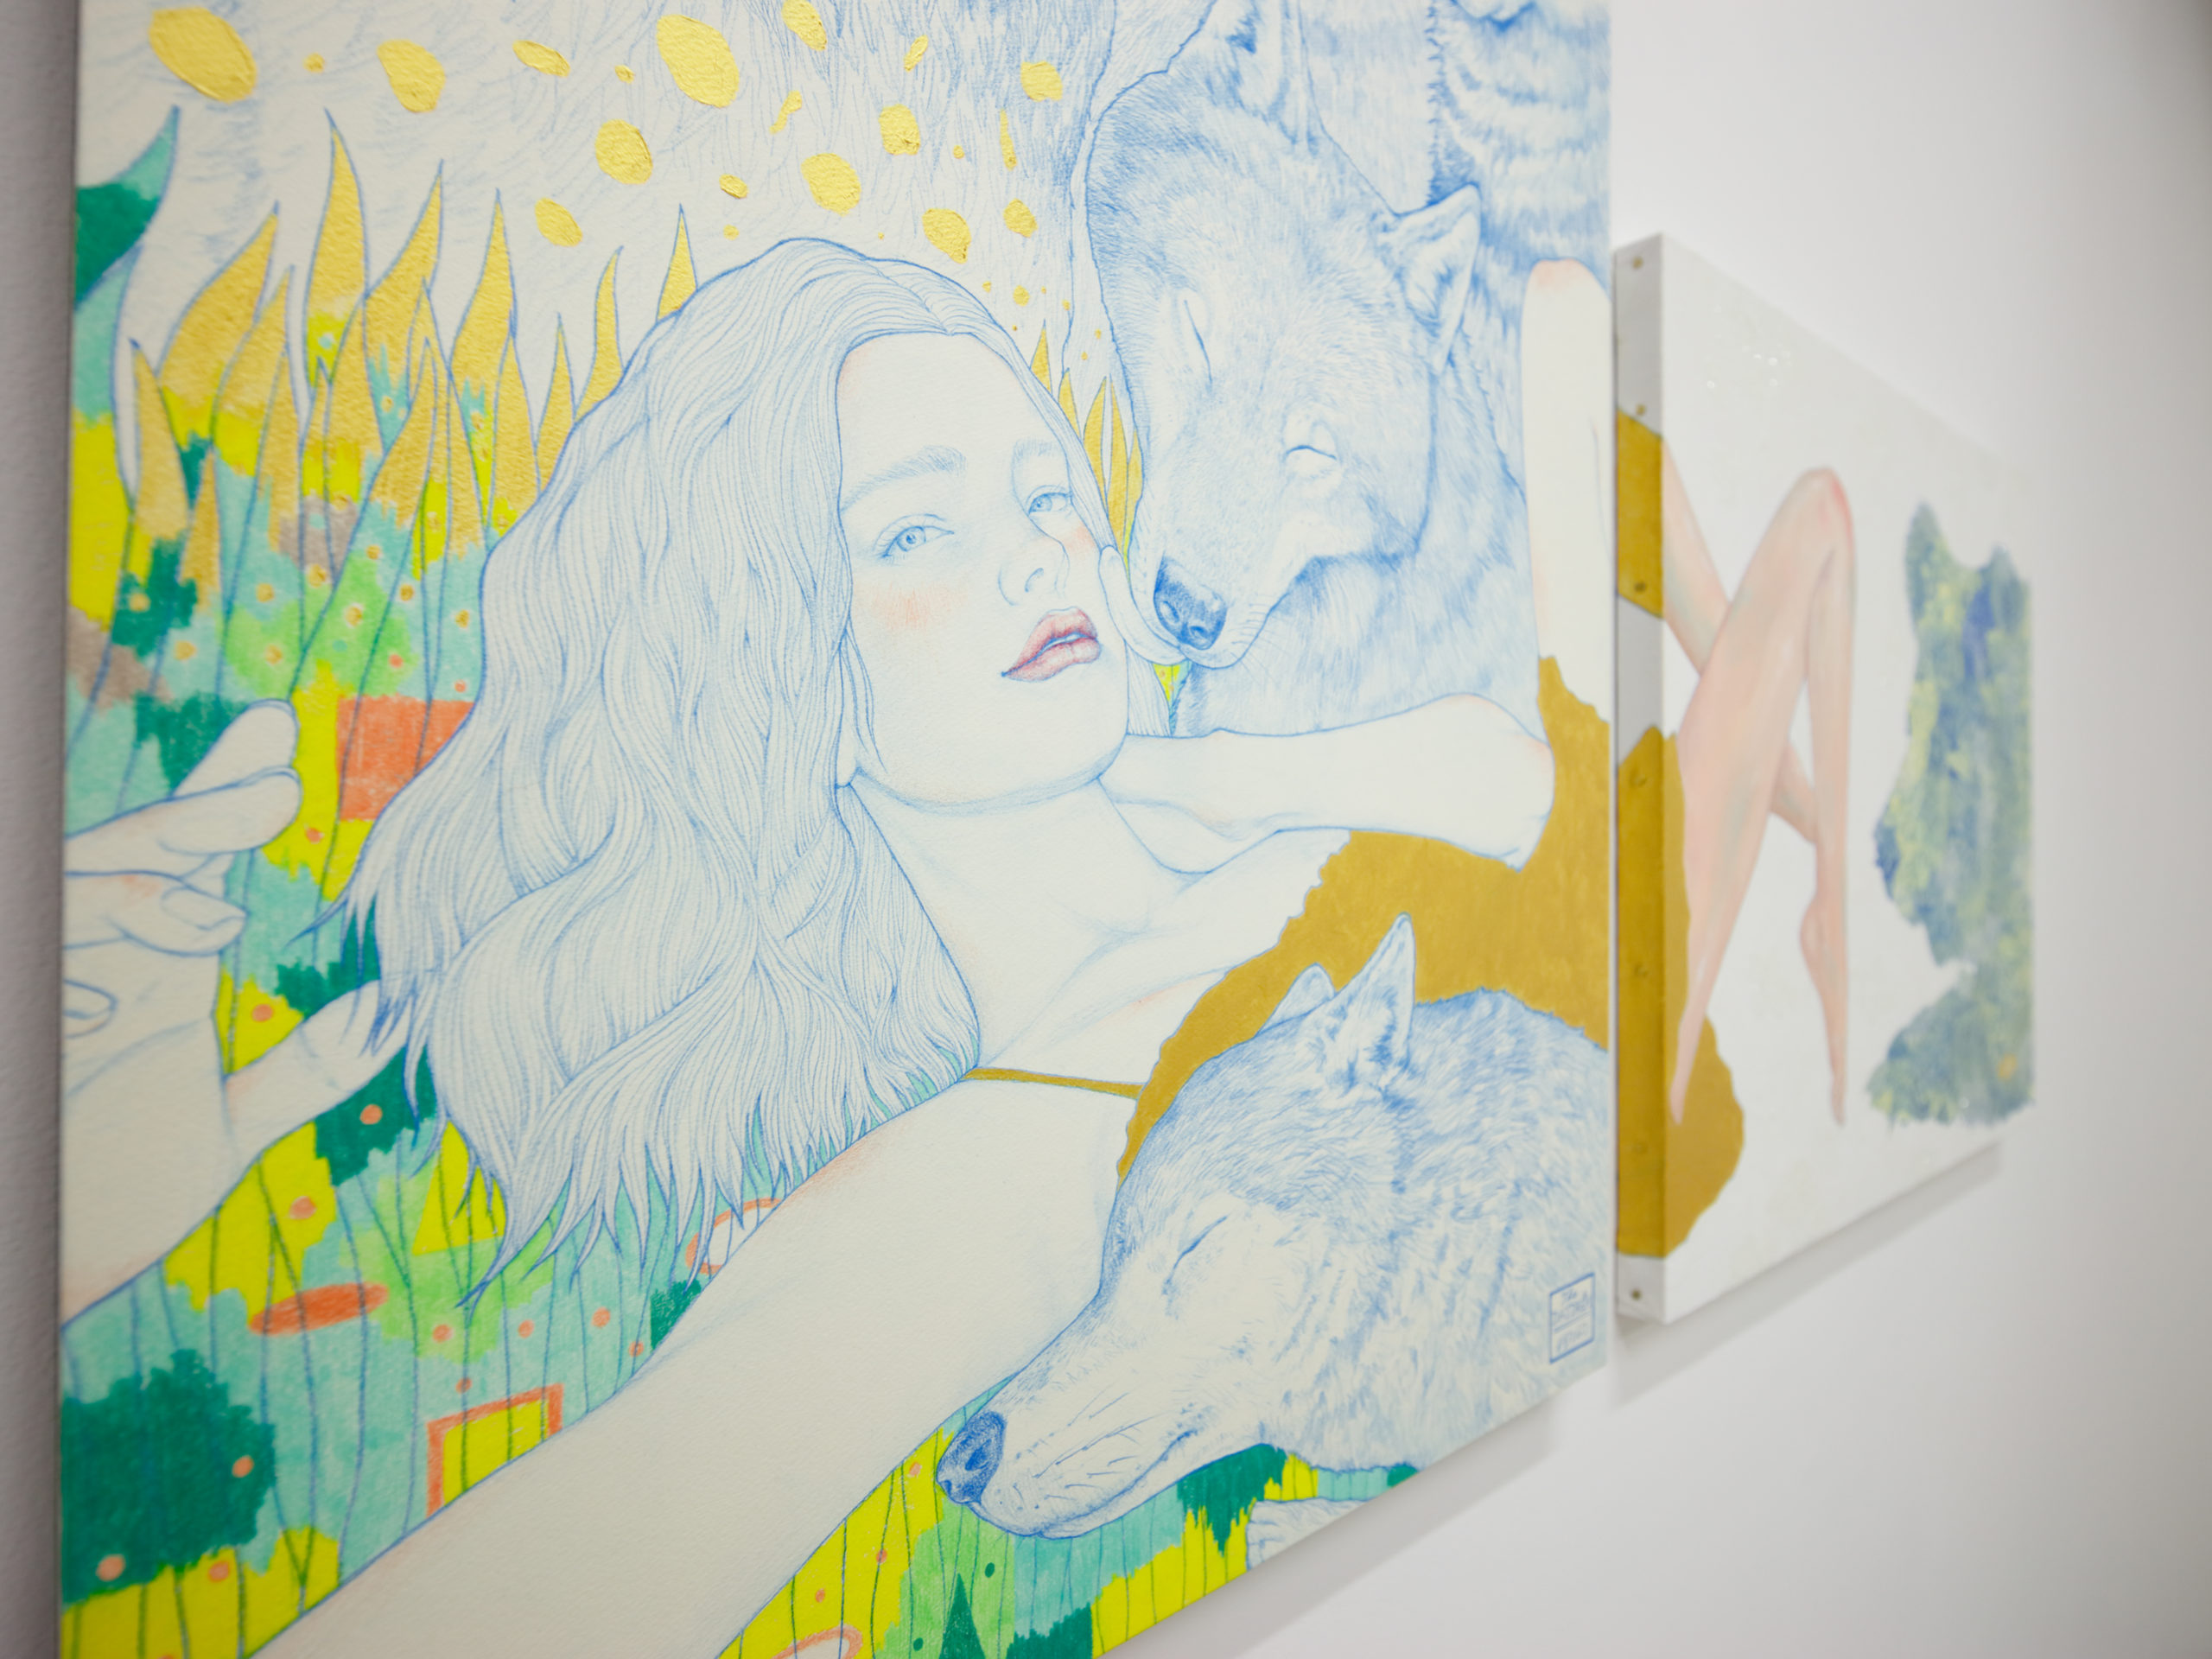 Anastasia – アナスタシアの木蔭／ 1333✖️900mm／for solo show『Crystallized Points of View』at hpgrp gallery Tokyo Aoyama／ Wonder Color Pencil